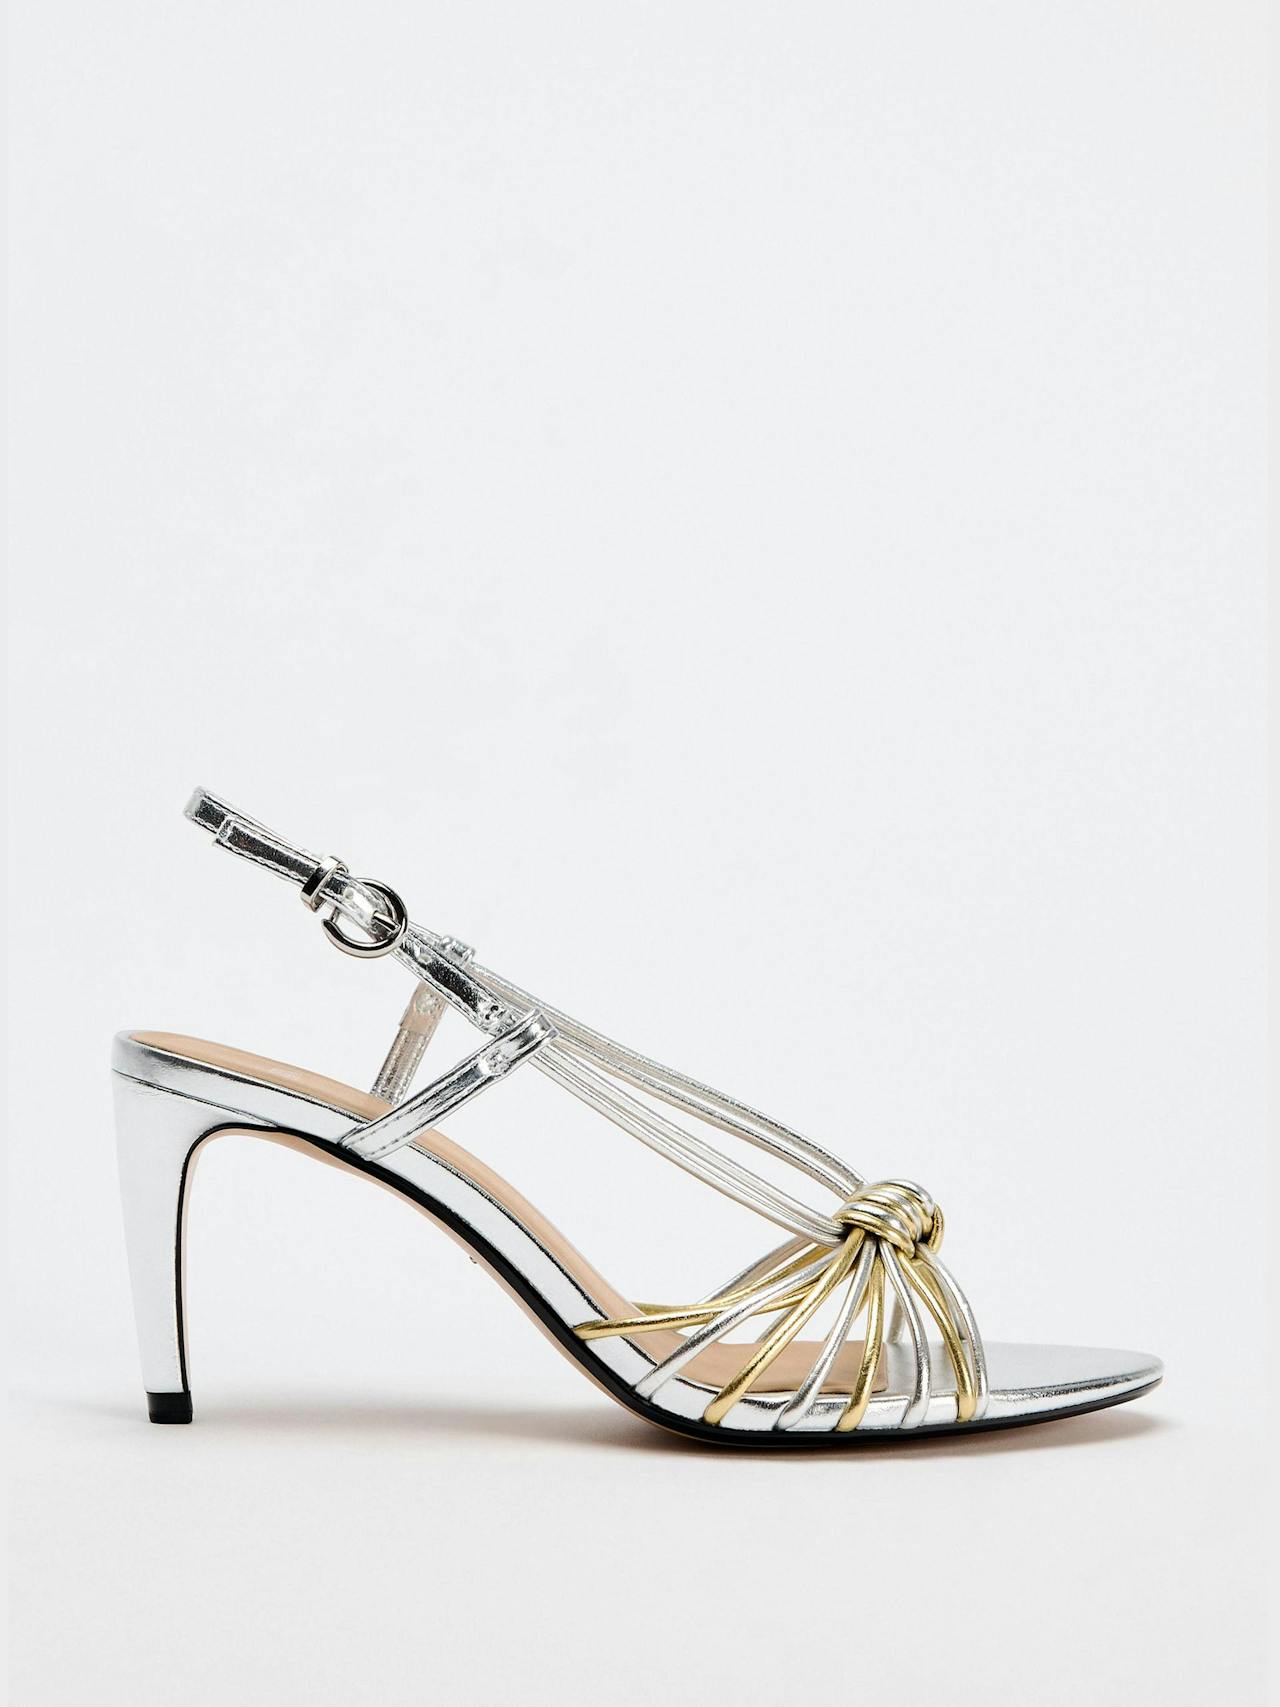 Metallic sandals with knotted straps